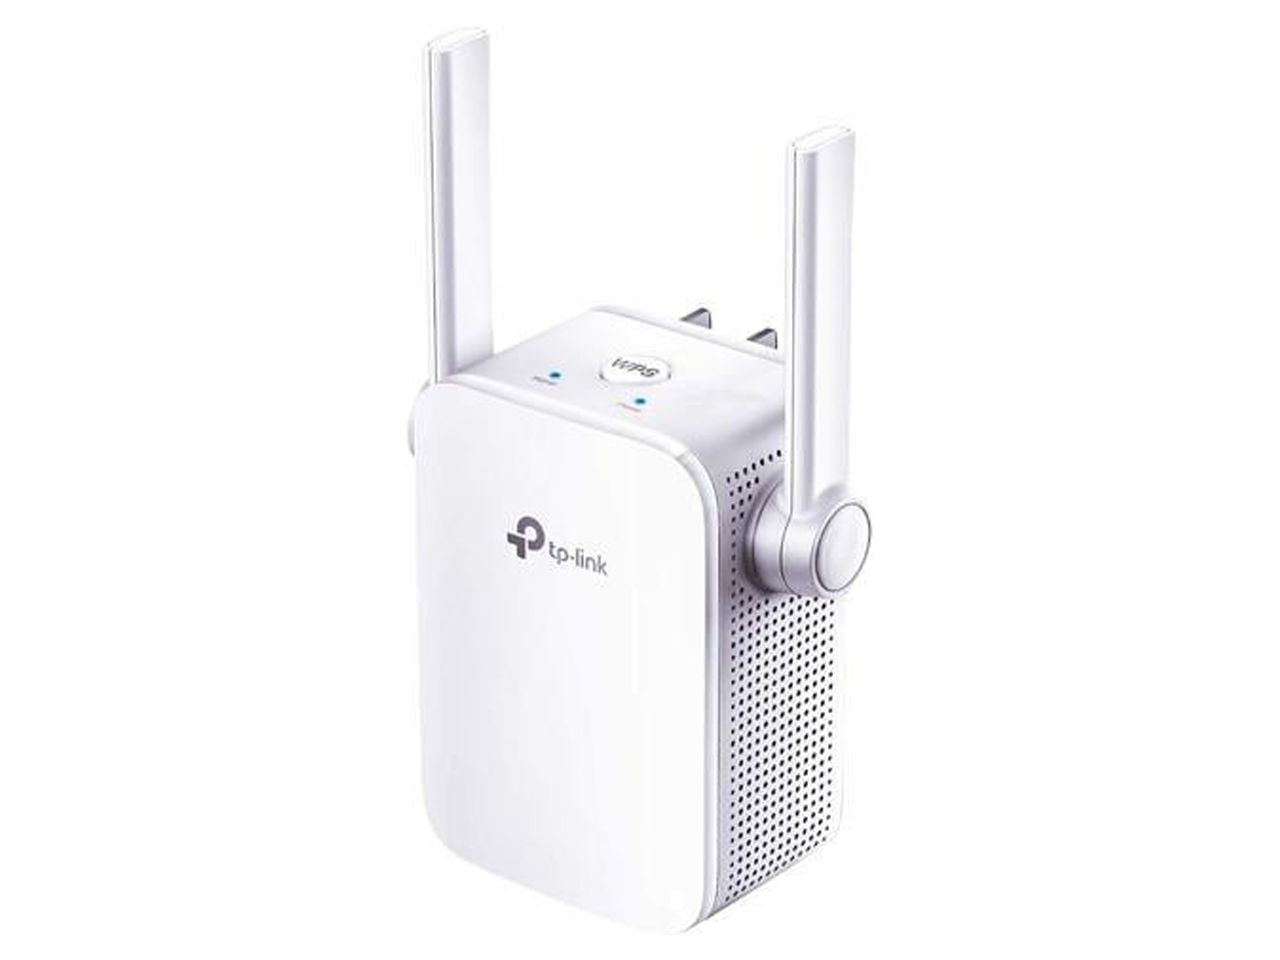 TP-Link N300 WiFi Extender (RE105), WiFi Extenders Signal Booster for Home,  Single Band WiFi Range Extender, Internet Booster, Supports Access Point,  Wall Plug Design, 2.4GHz only 